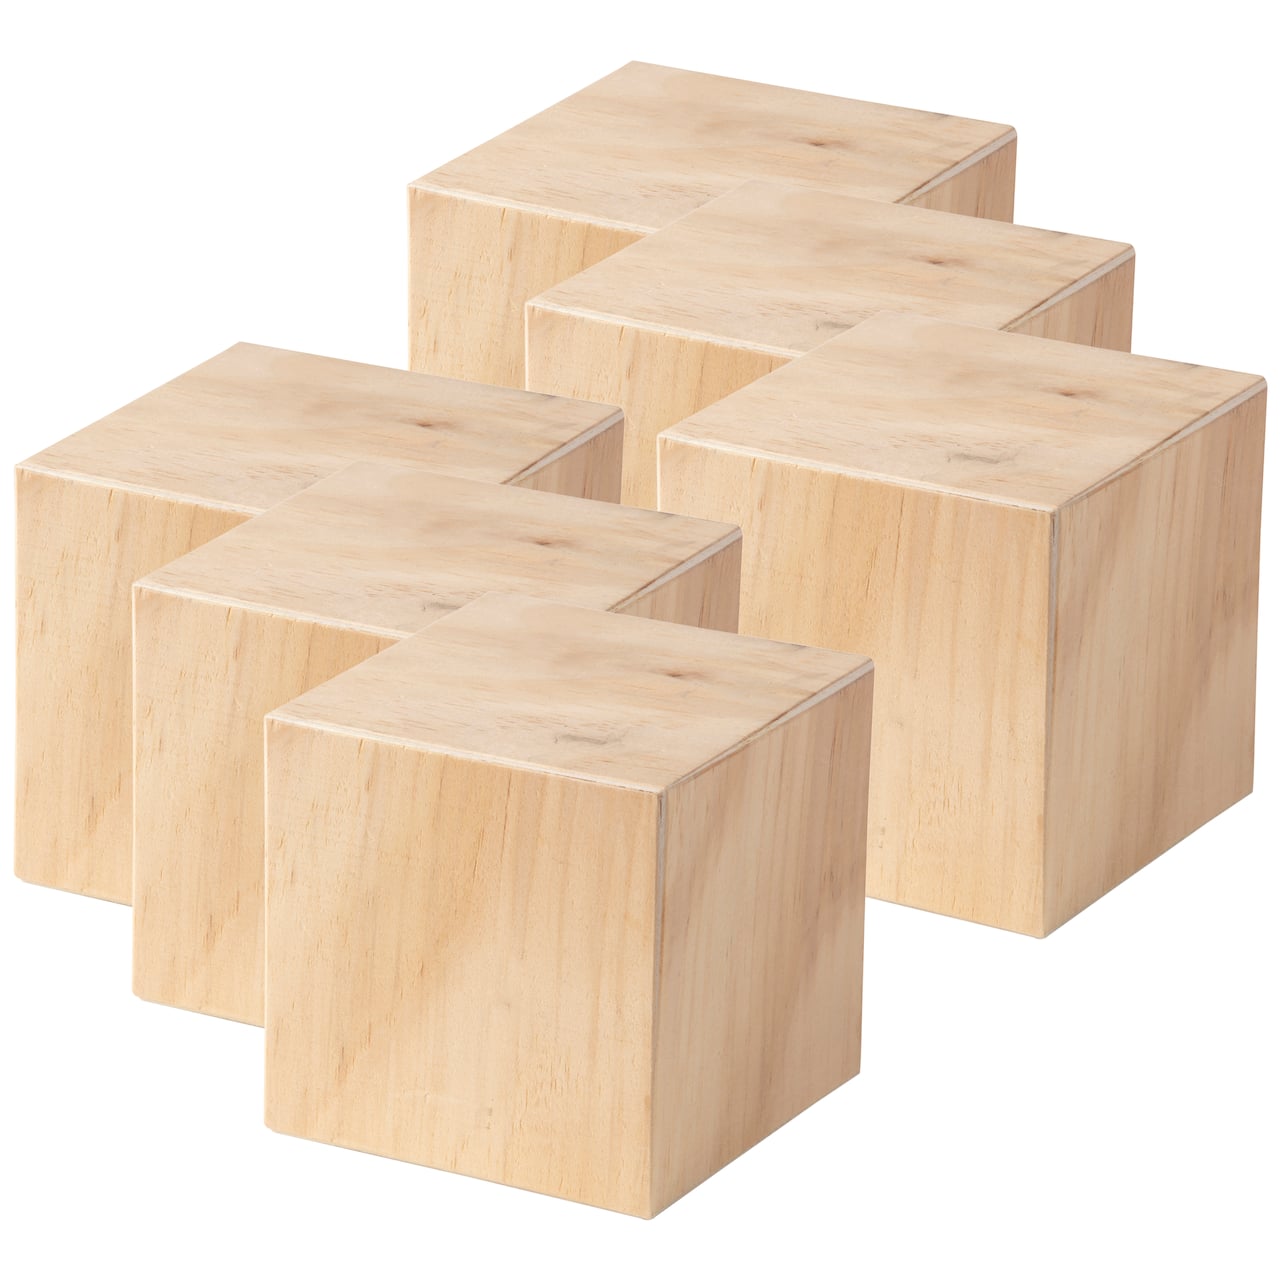 6 Pack: 3 Wood Square Block by Make Market®